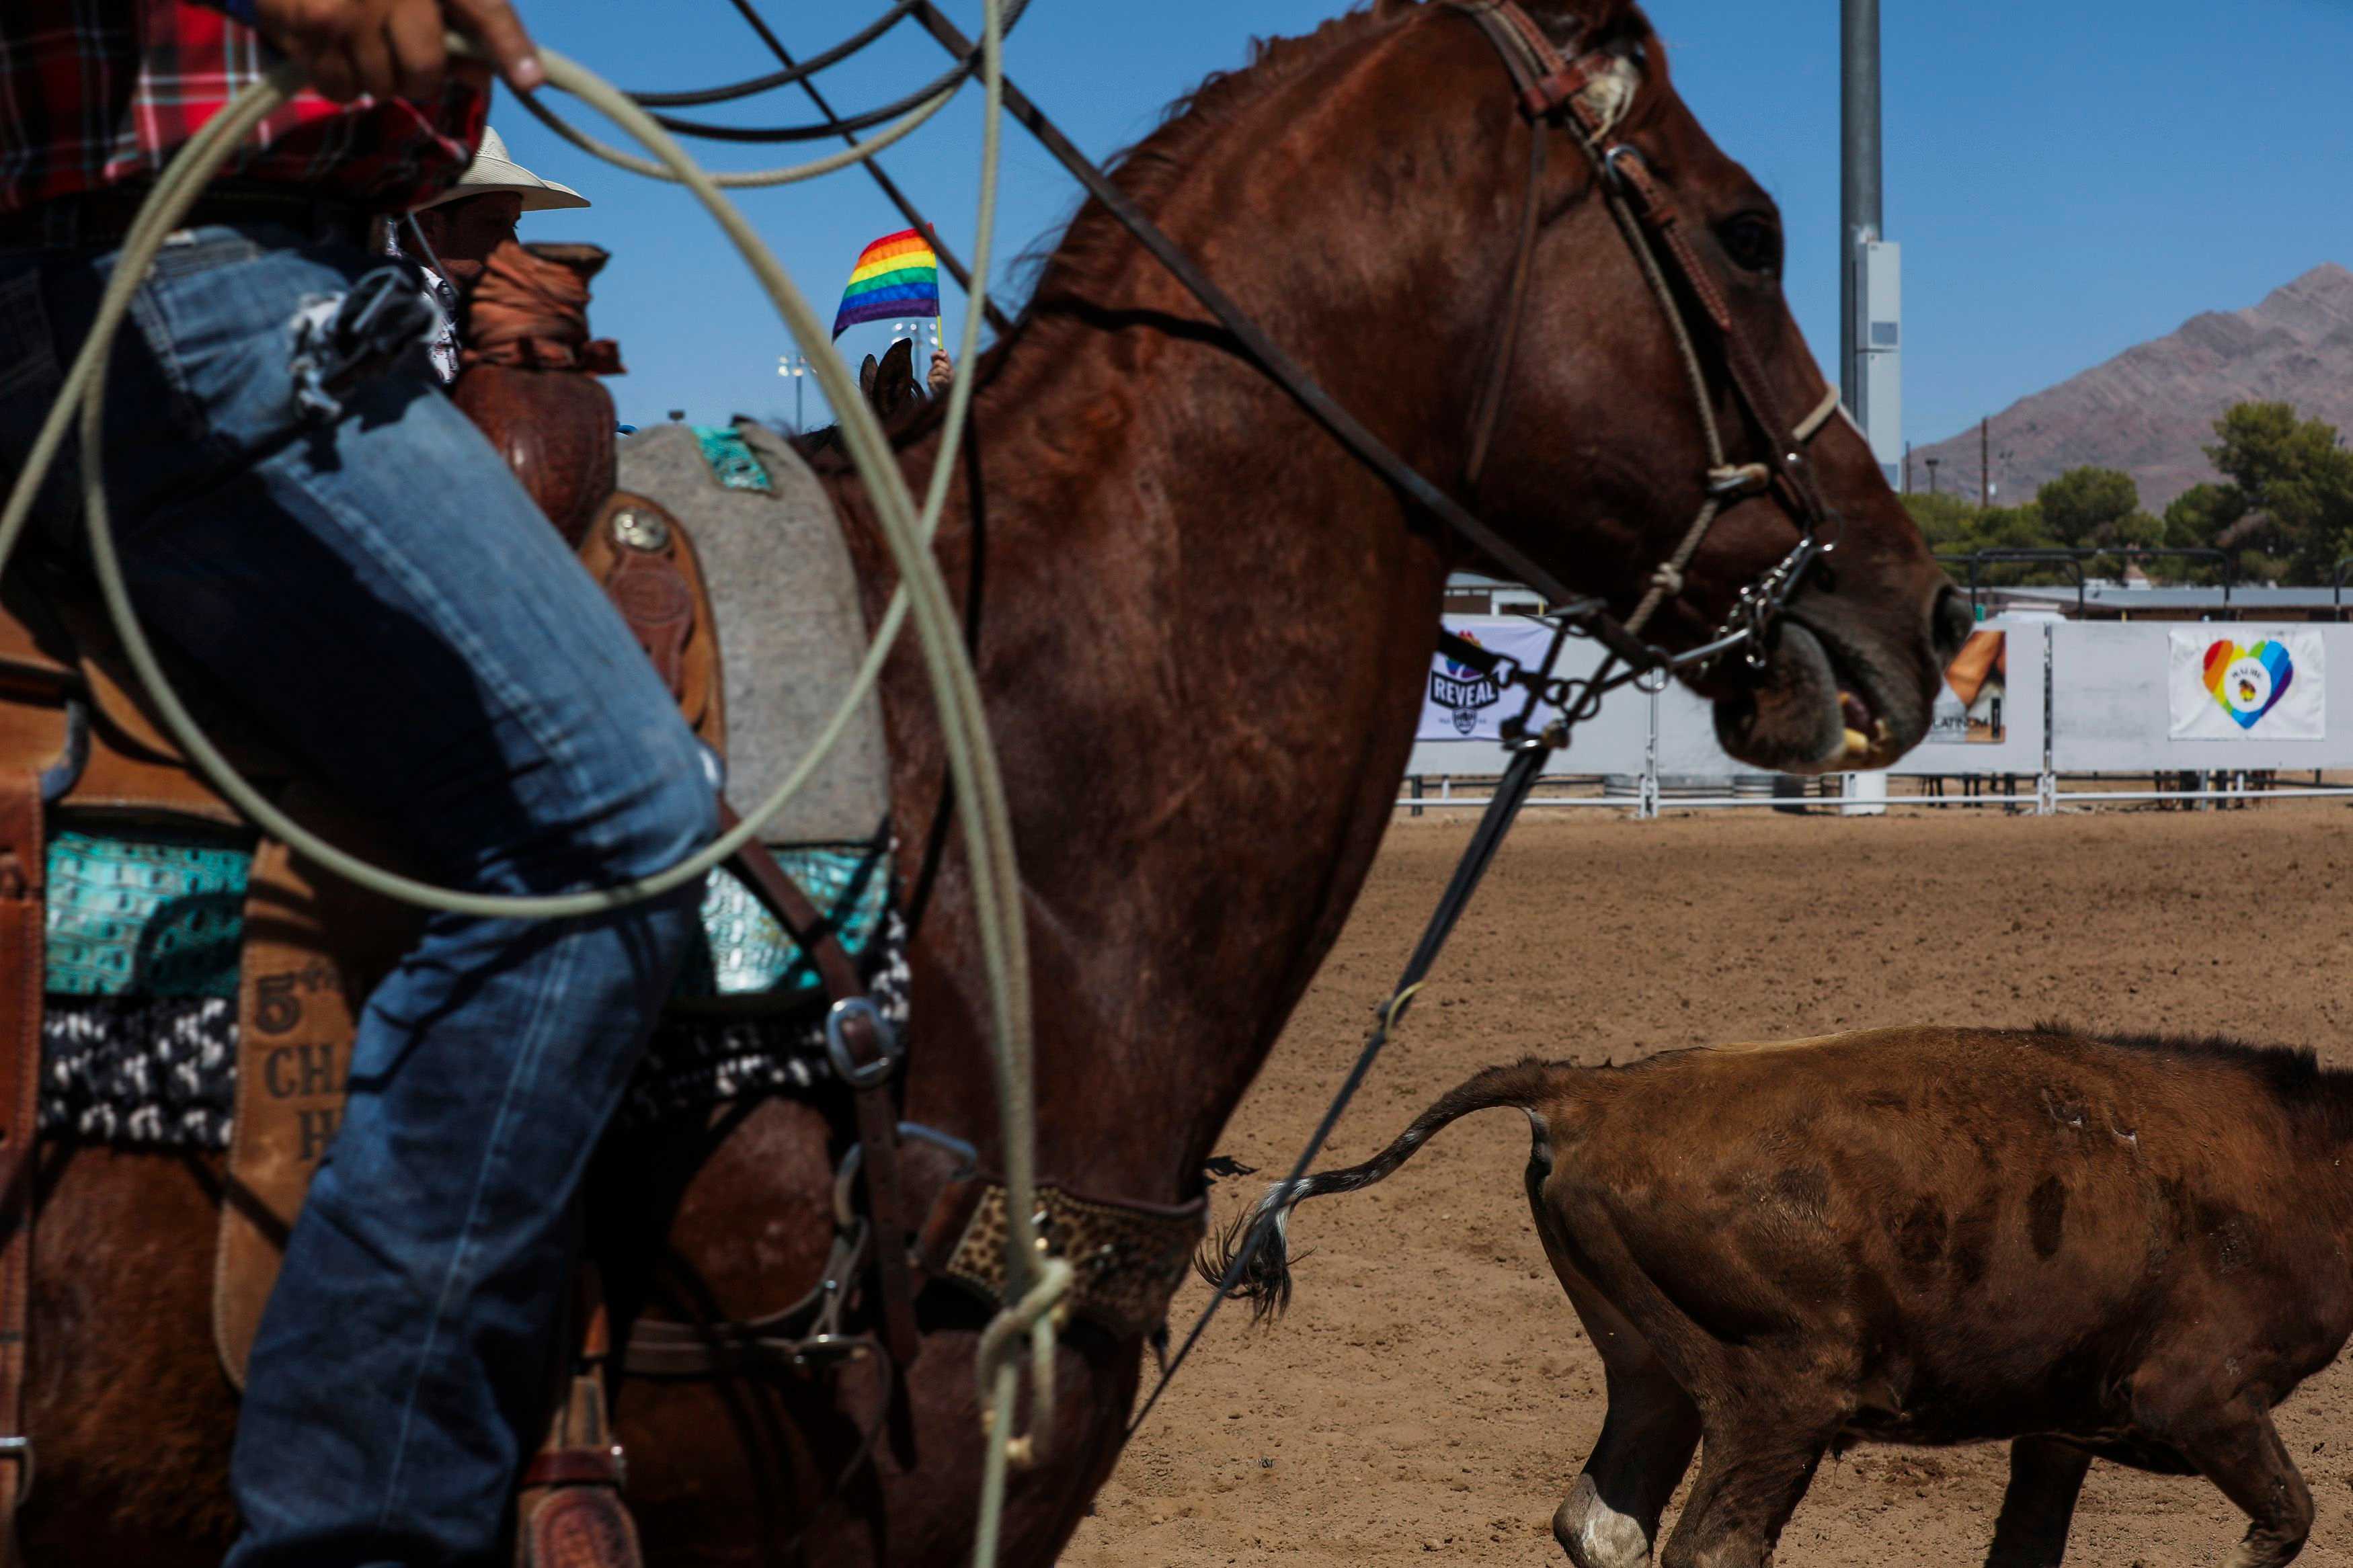 A rodeo judge held a rainbow flag during the calf roping on foot competition Nevada Gay Rodeo Association’s BigHorn Rodeo.